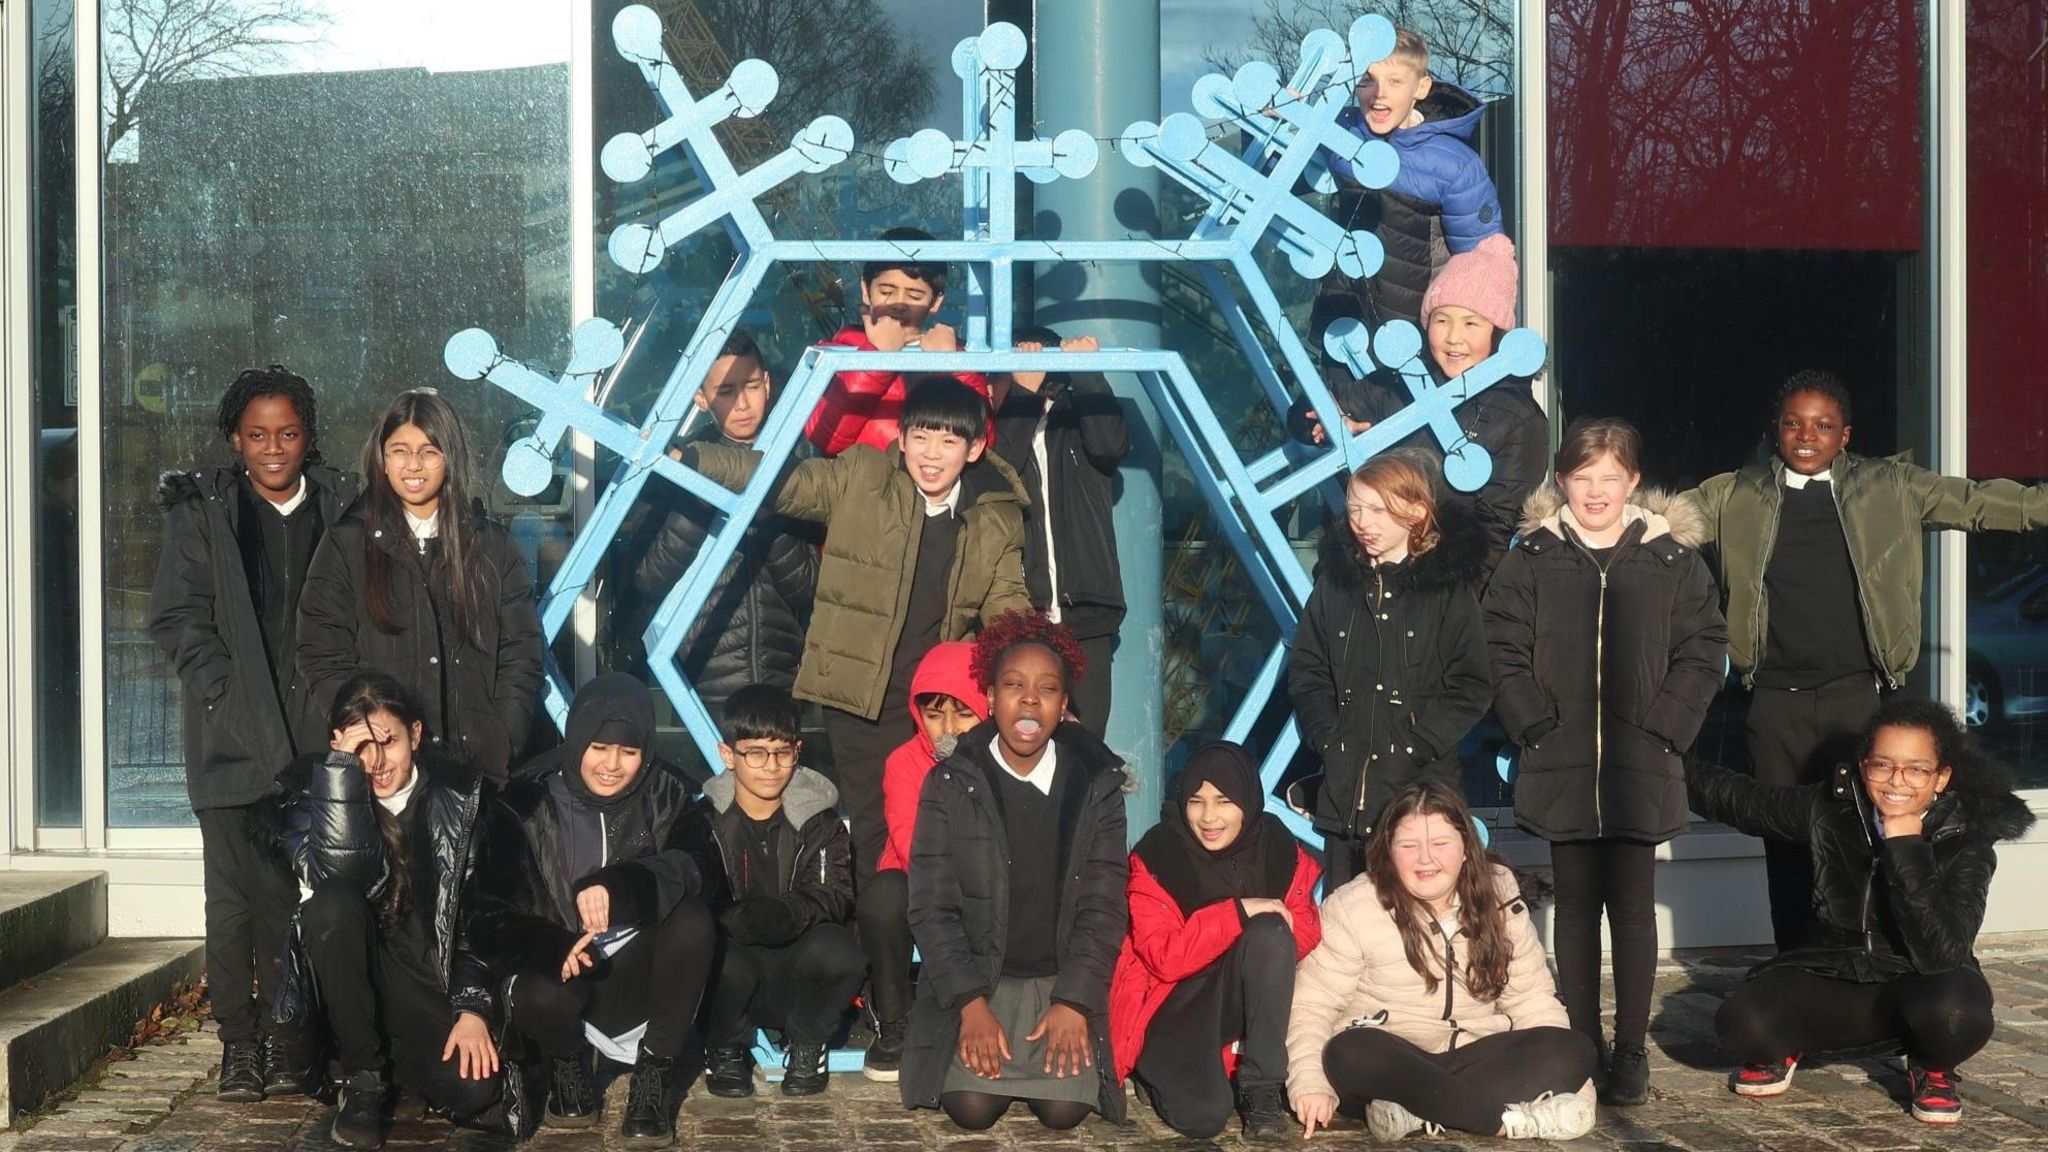 Group of school kids standing in front of a metal snowflake